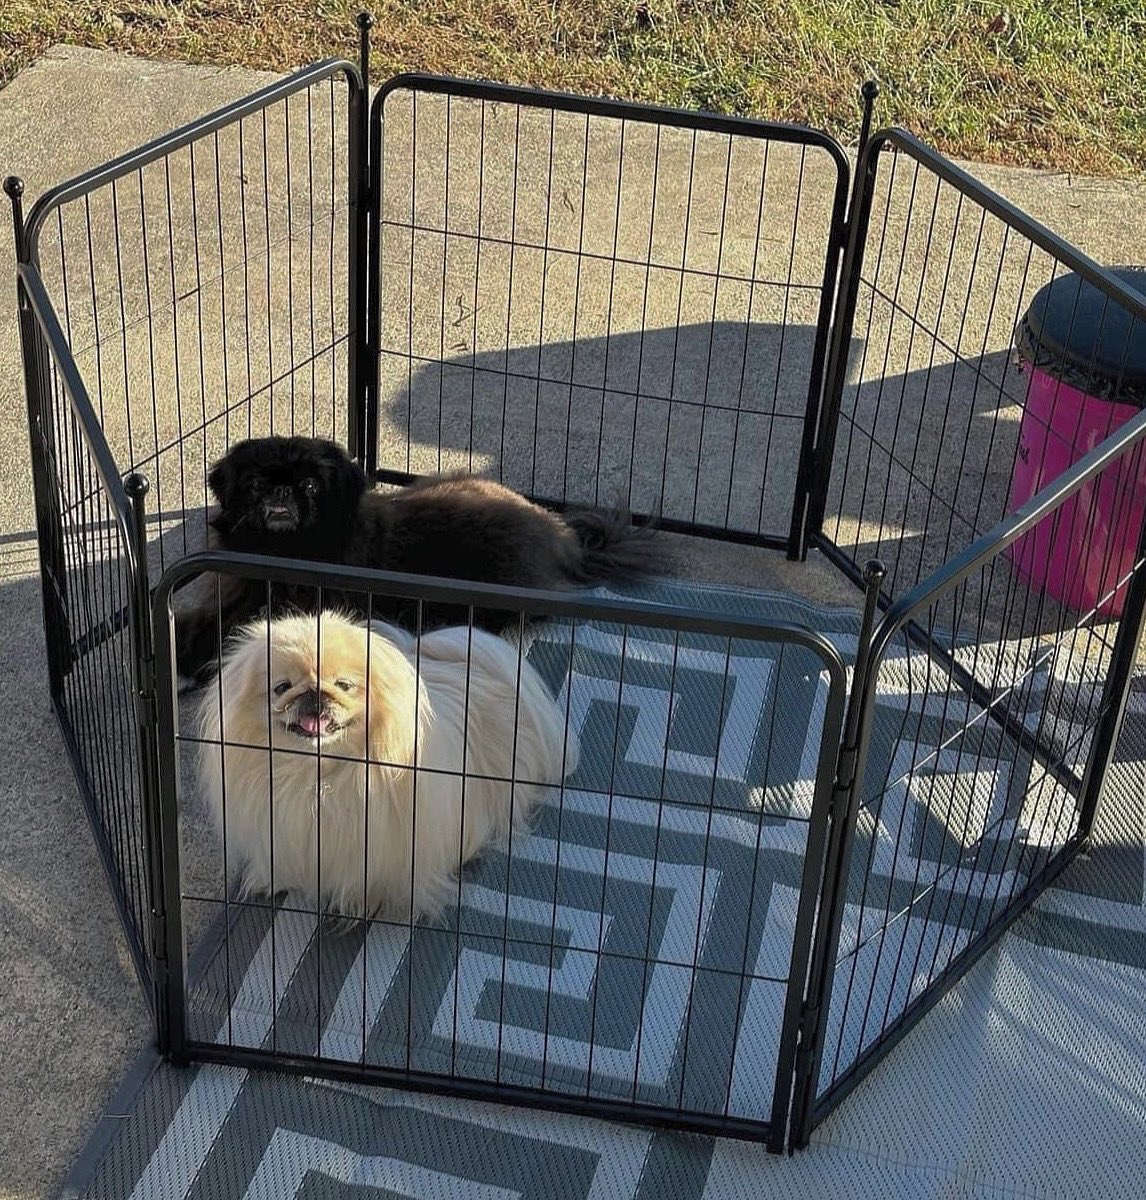 Iz dis what dey mean by “feel-n like a caged animal” Sammy doesn’t behabe so we set him up a pen, but why am I in it? 

.
.
#caligurl #flamingler #rollingrenegade #sweetsammy #rvdogs #BigAl #campingwithdogs #travelgram #travelling #fyp #fypシ゚ #AdventureAwaits #adventuretravel